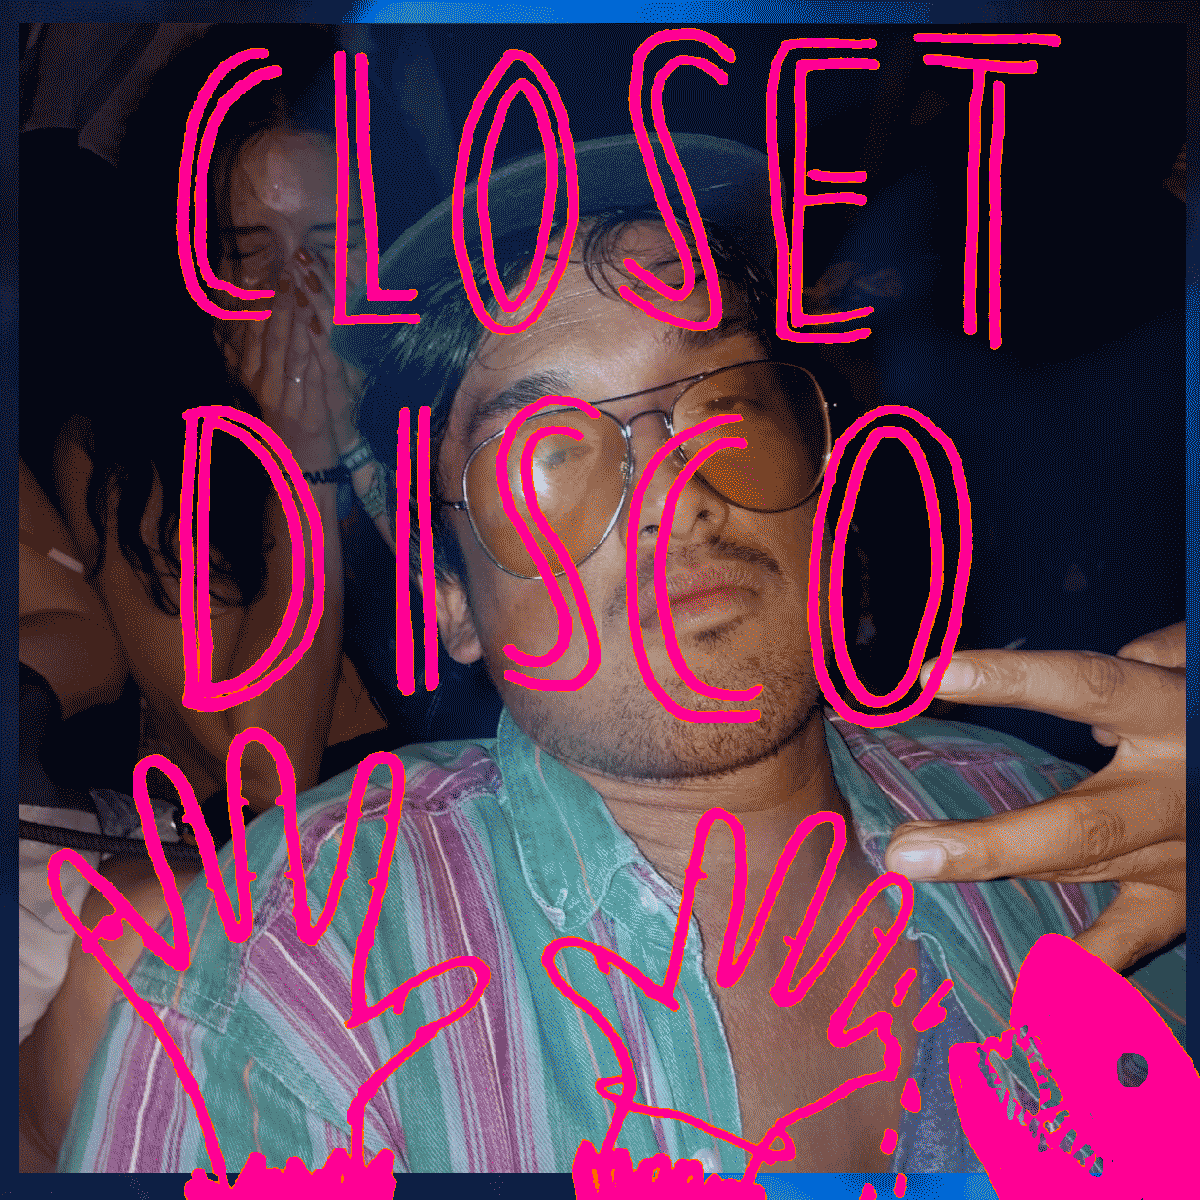 Cover for the Closet Disco 9 mixtape shows an Asain man having a good time. He is wearing pink goggles and a turquoise shirt